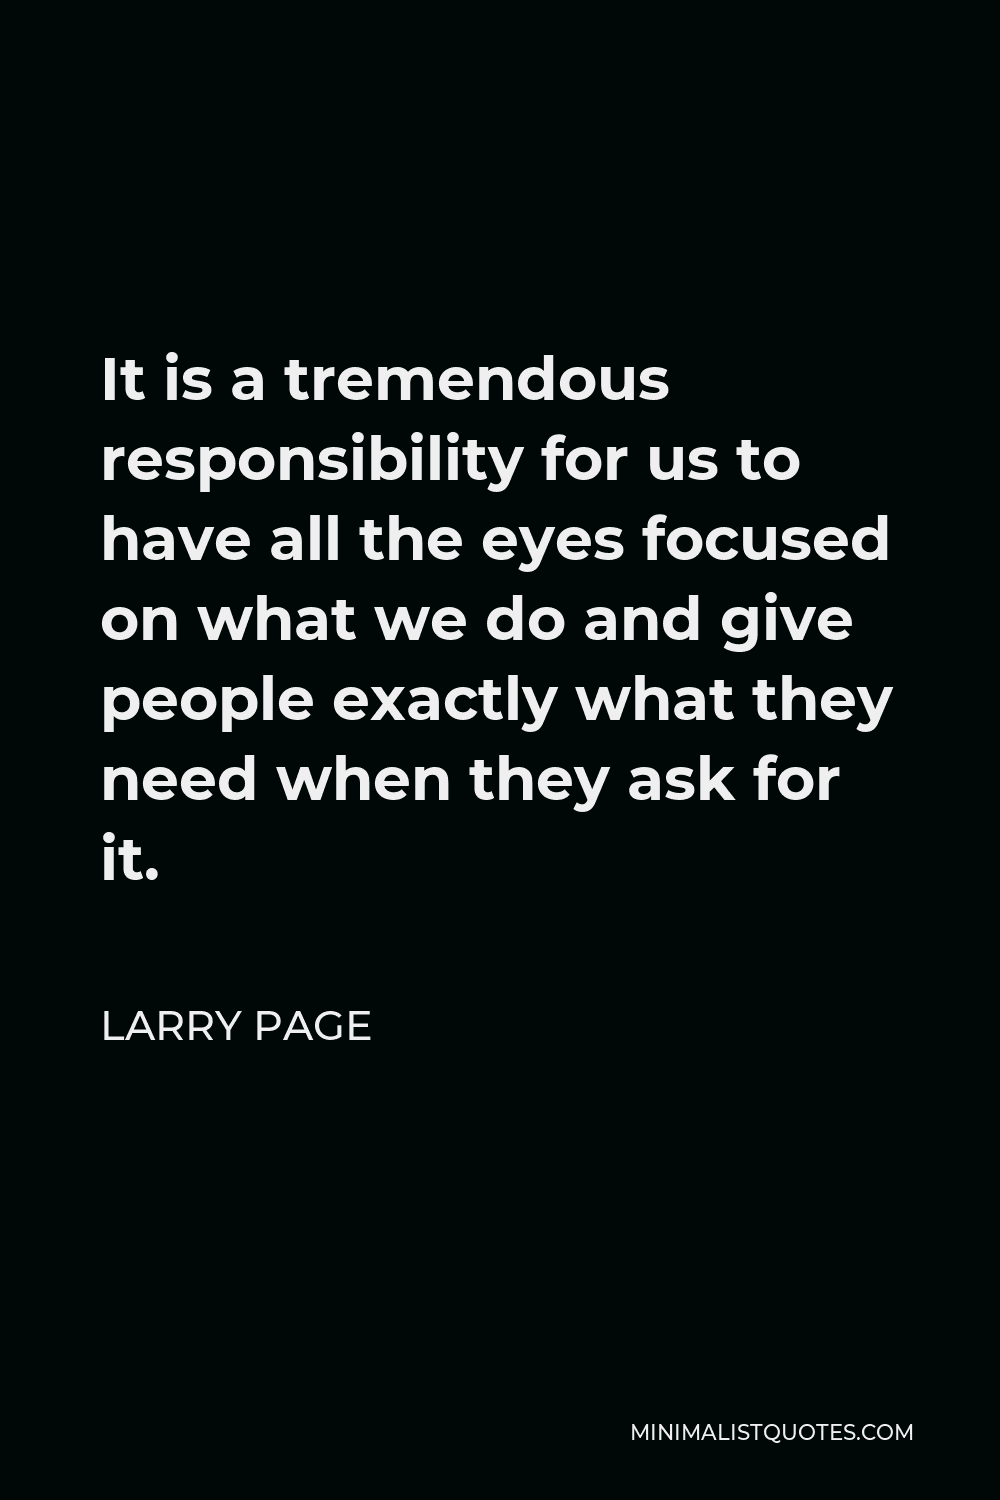 Larry Page Quote - It is a tremendous responsibility for us to have all the eyes focused on what we do and give people exactly what they need when they ask for it.